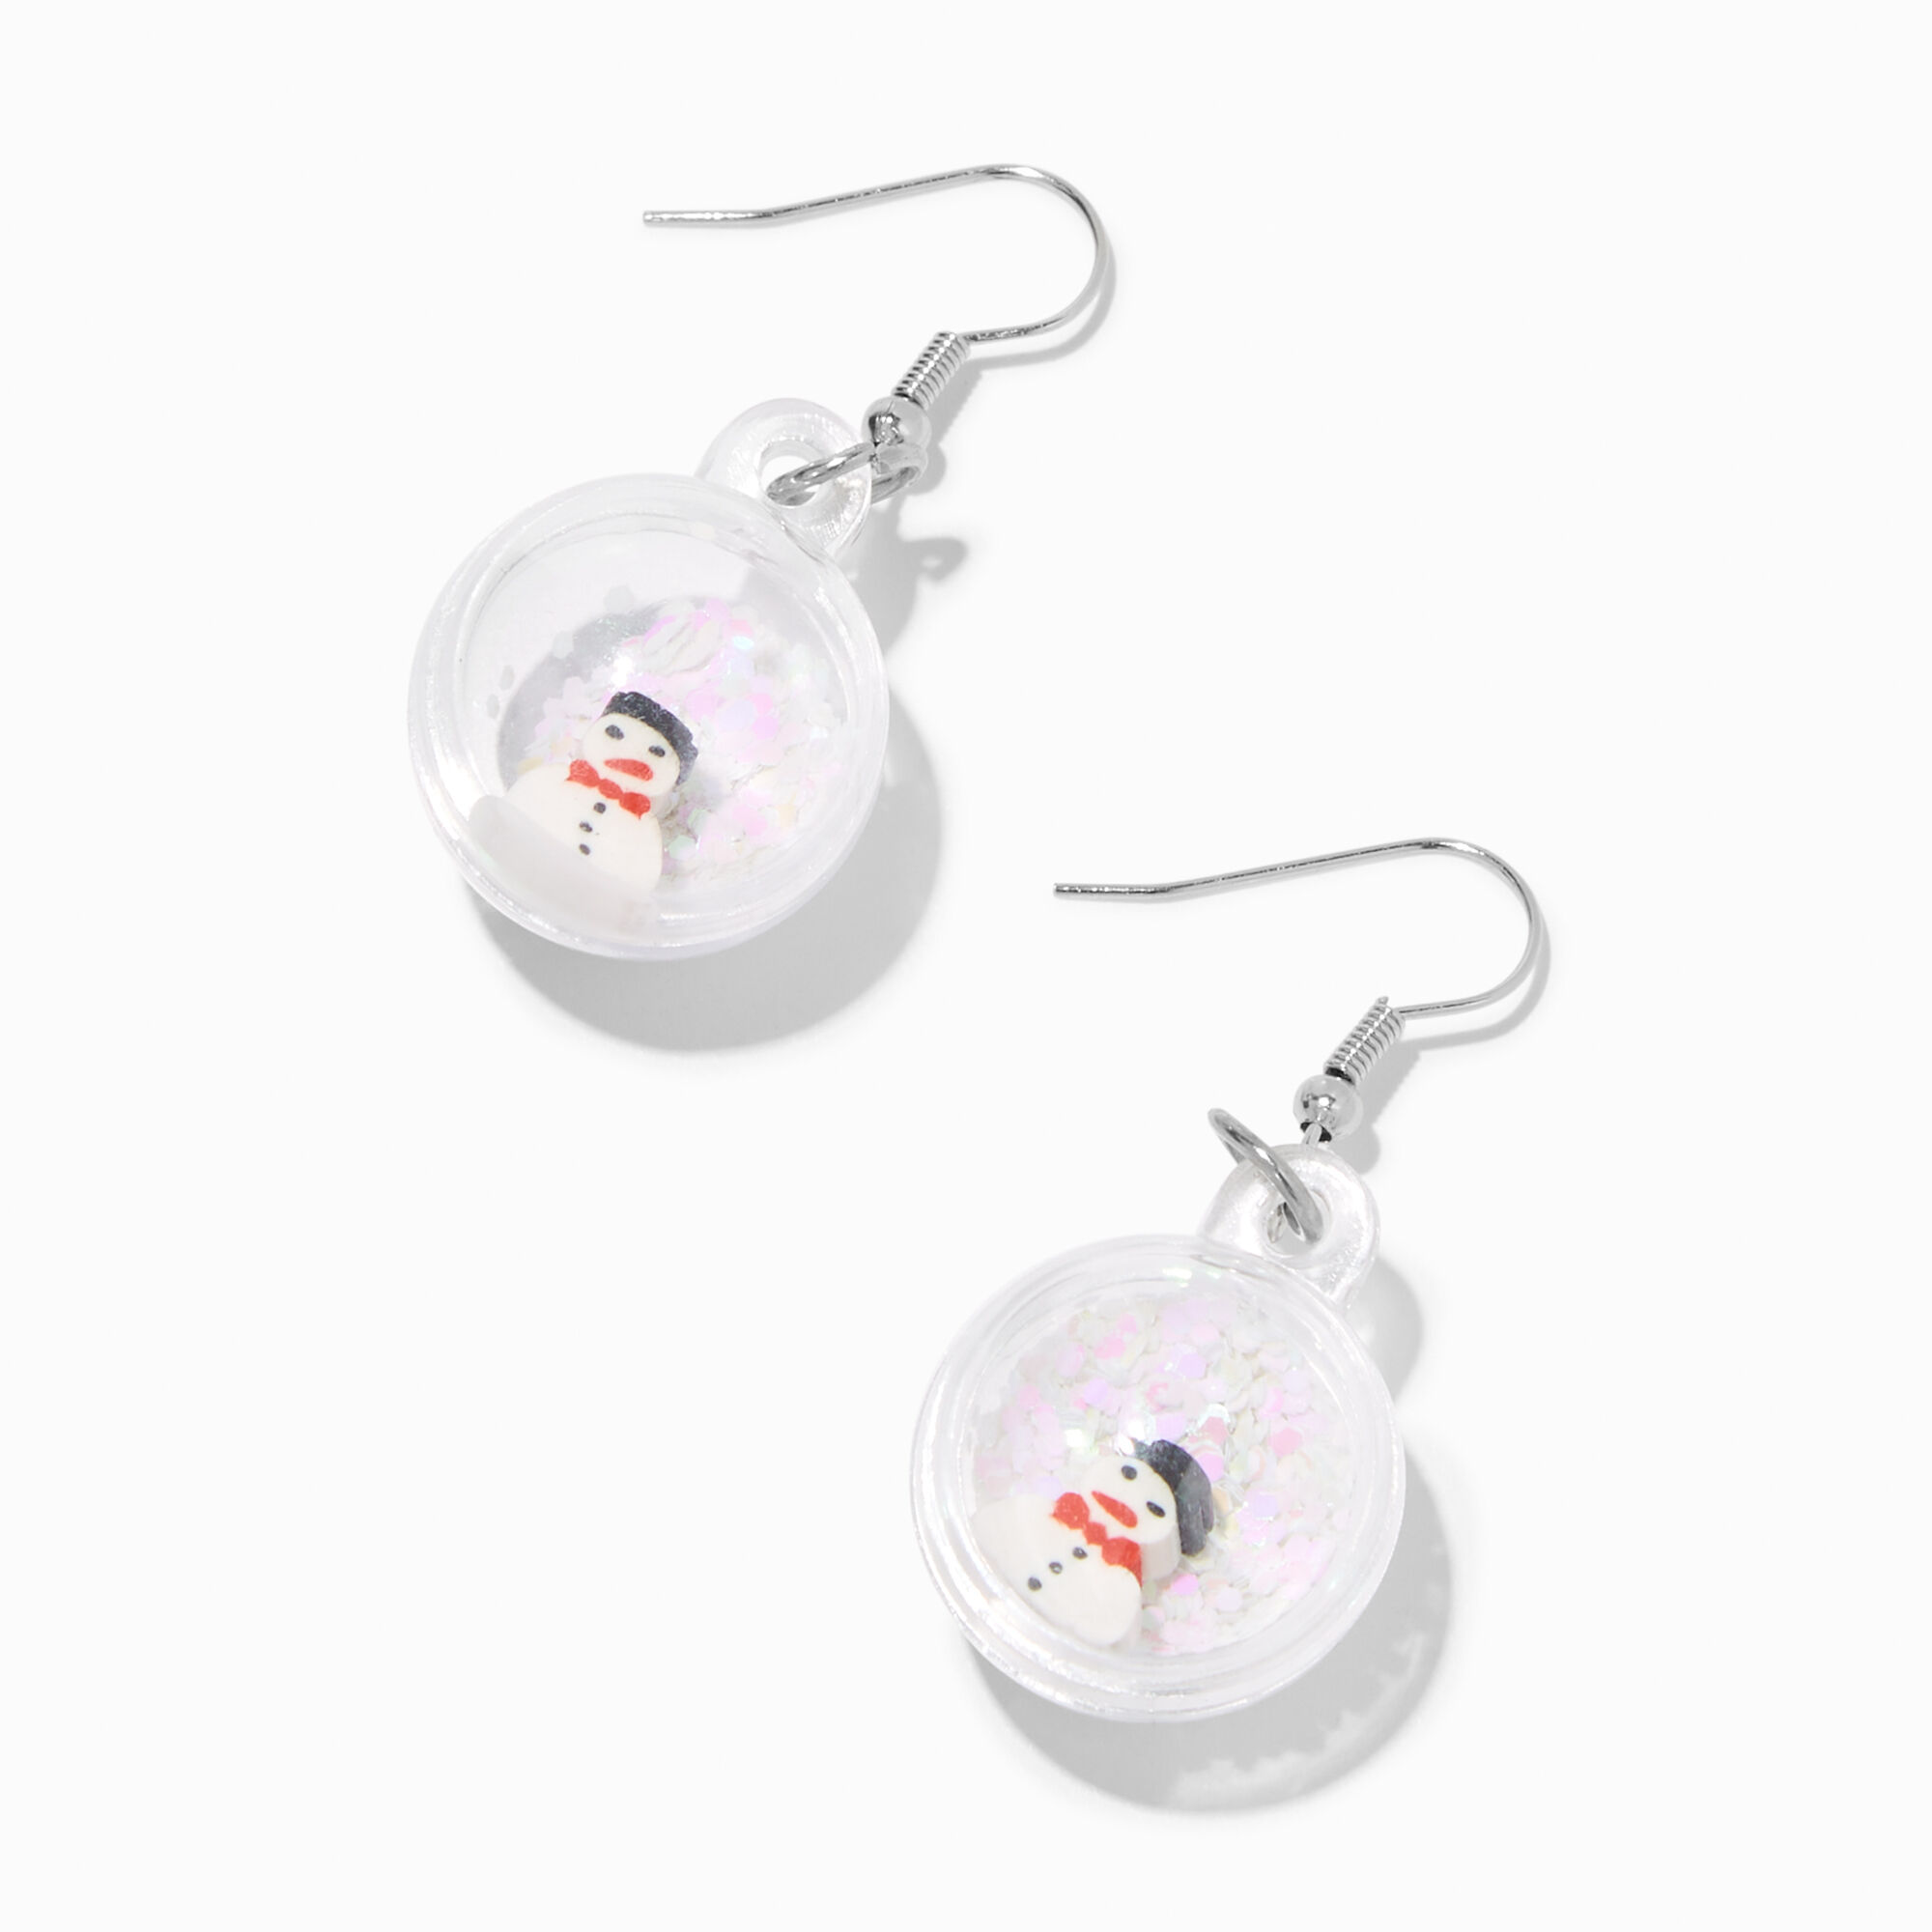 View Claires Snowman Snow Globe 1 Drop Earrings information